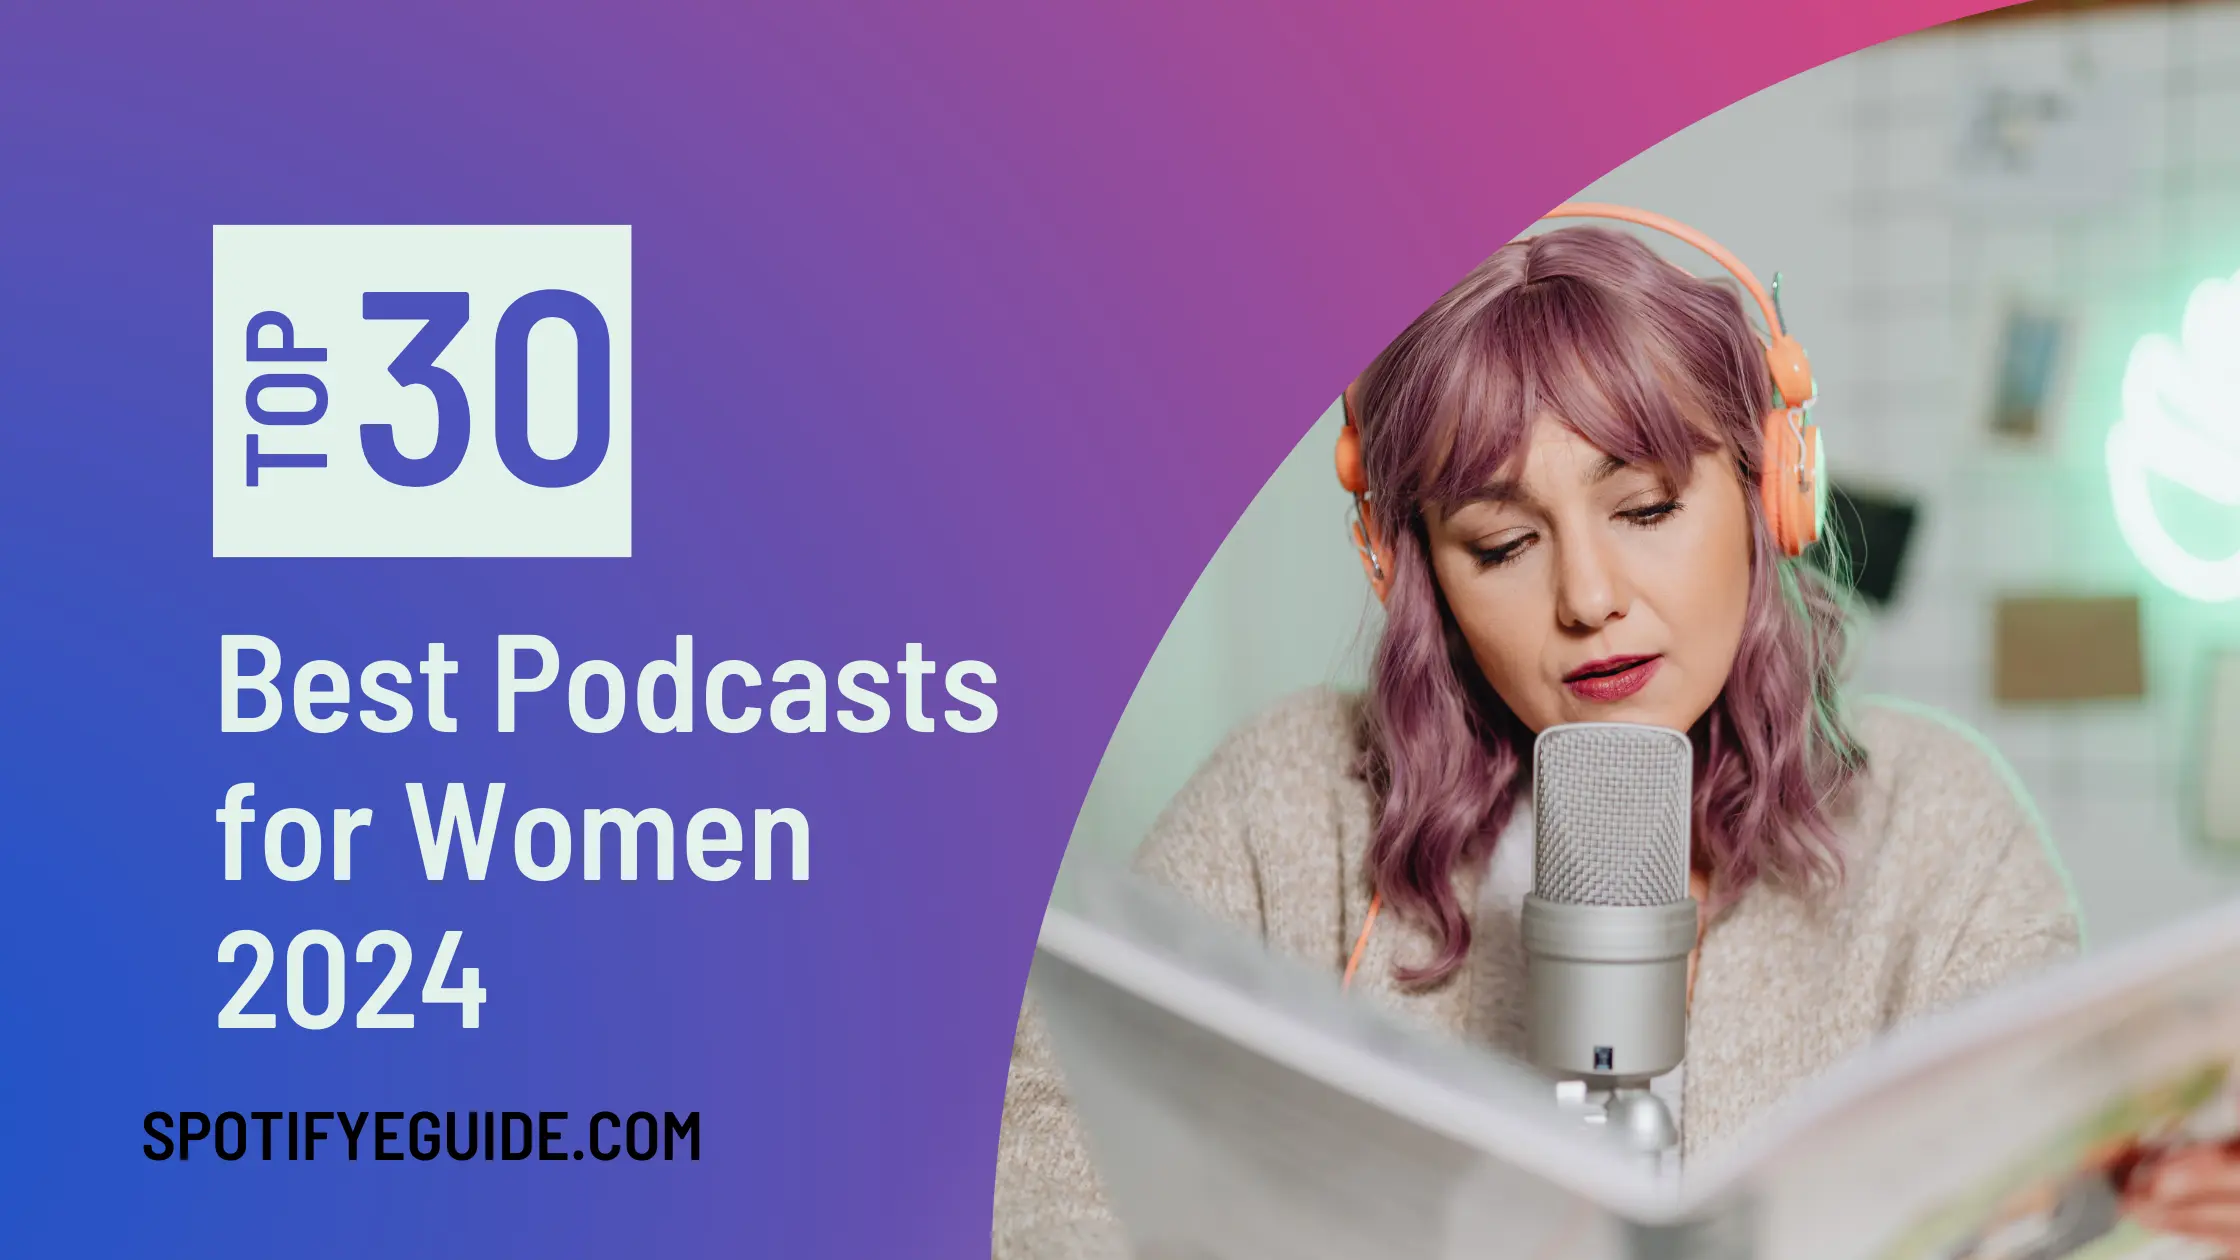 Top 30 Best Podcasts for Women 2024